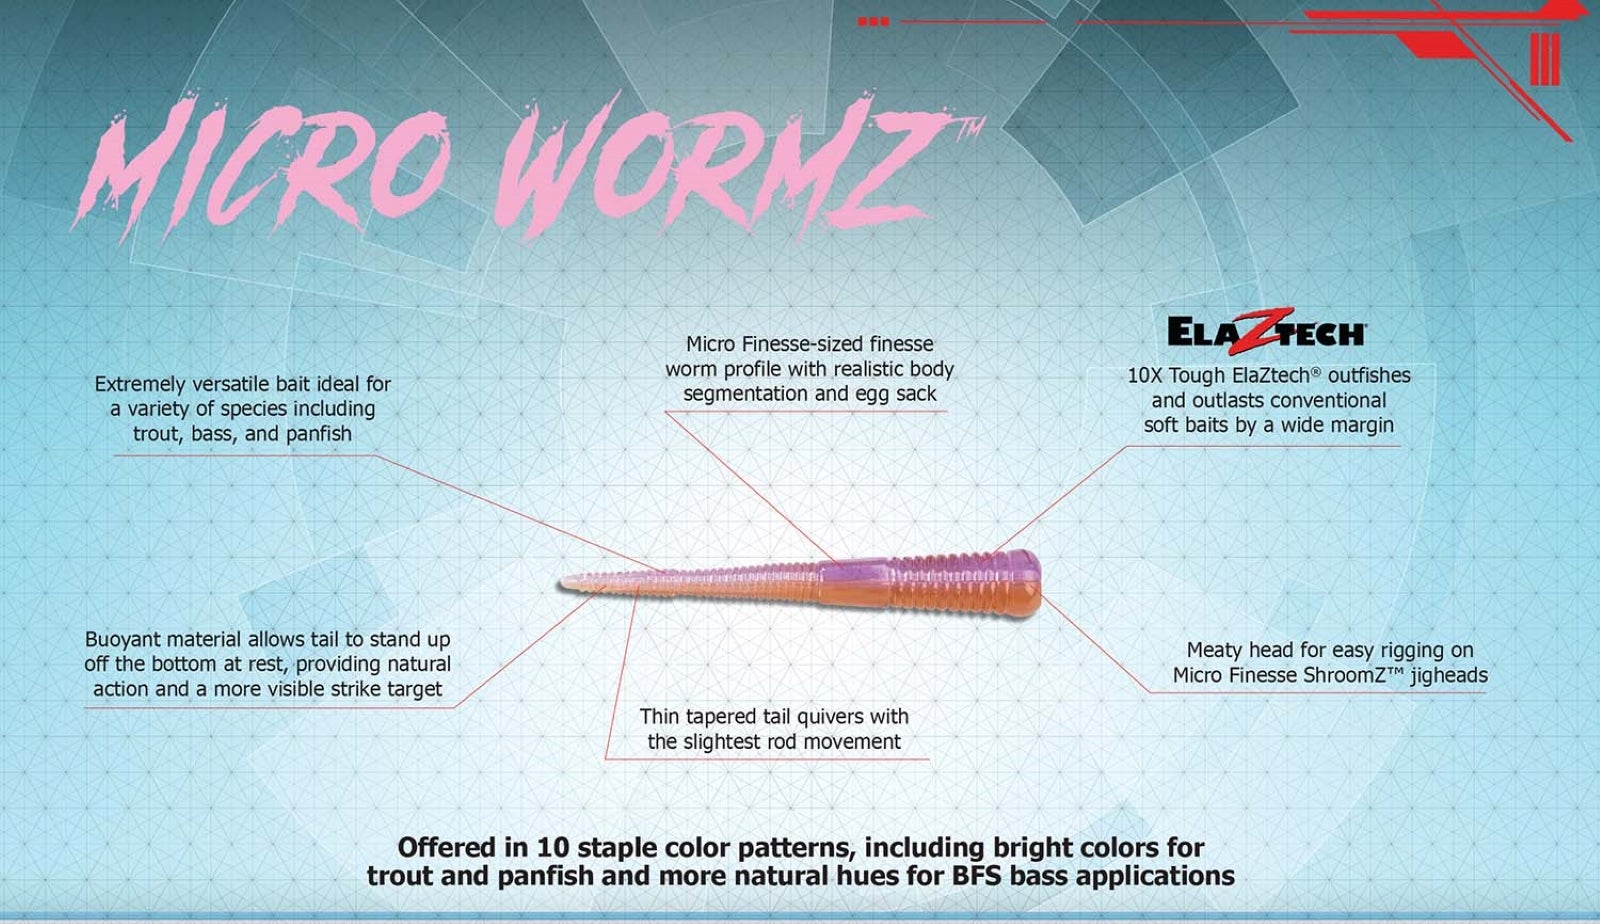 The NEW Micro WormZ from Z-Man